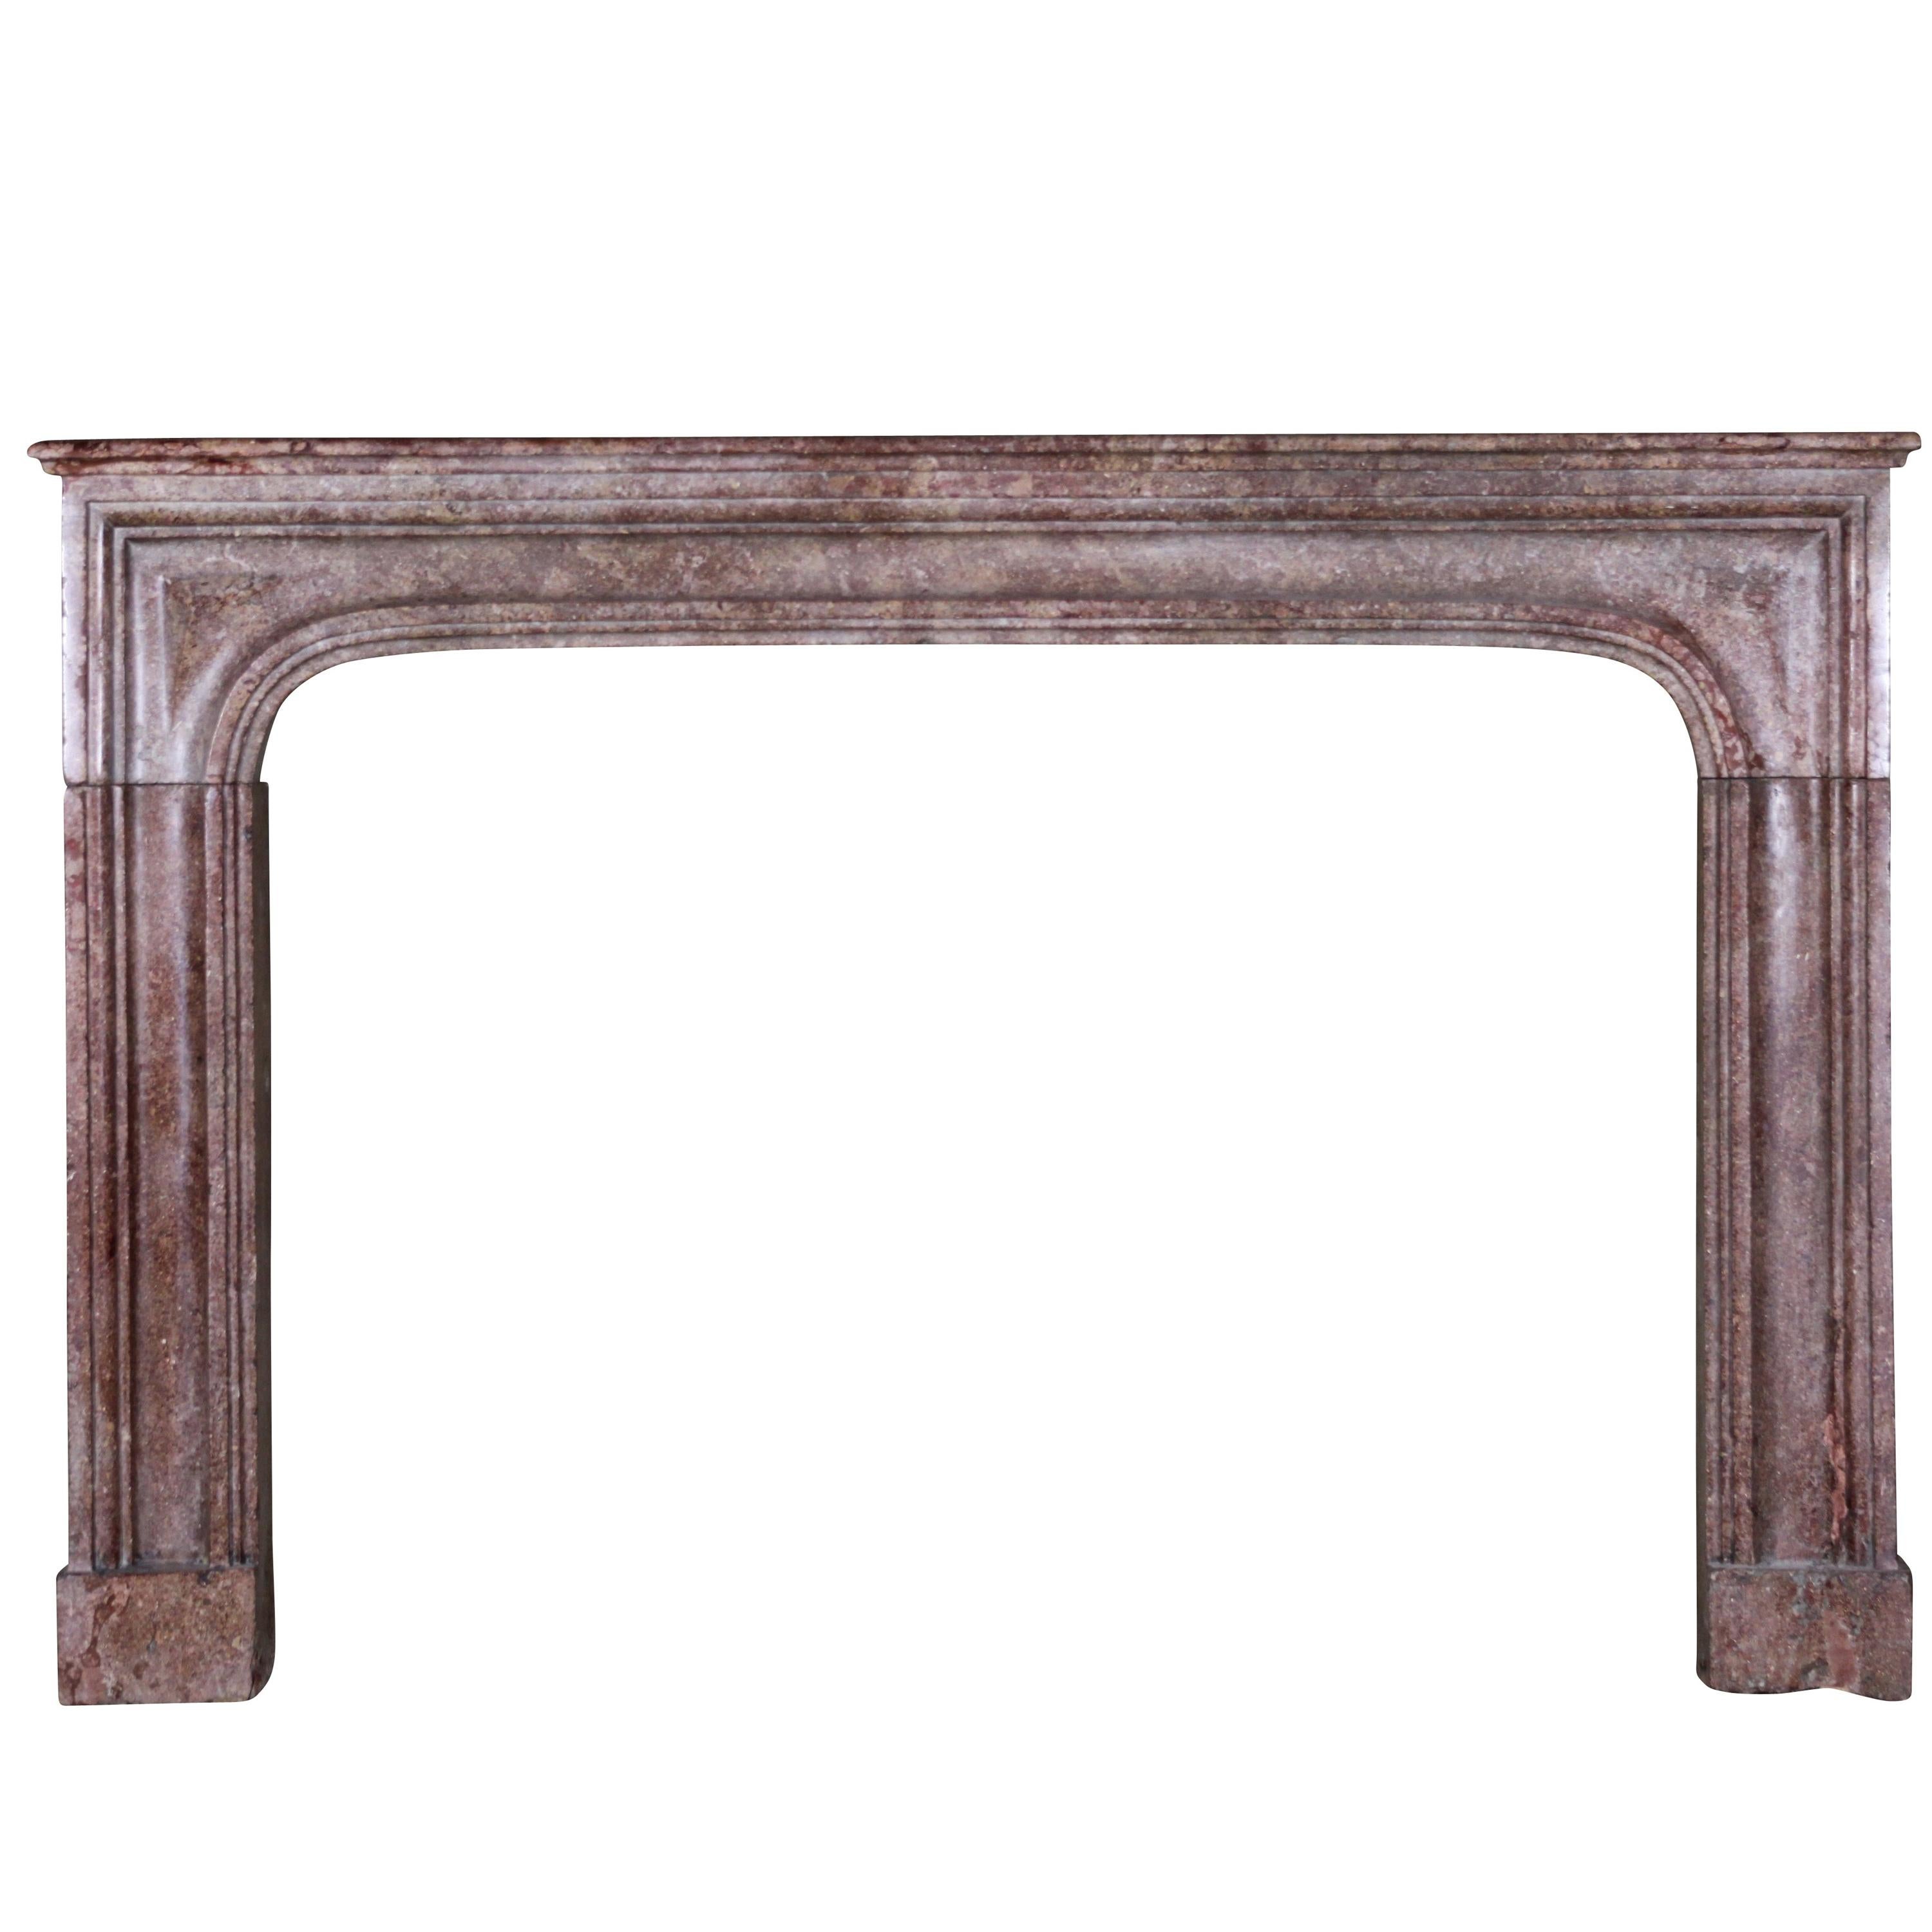 17th Century Timely Antique Fireplace Surround For Sale